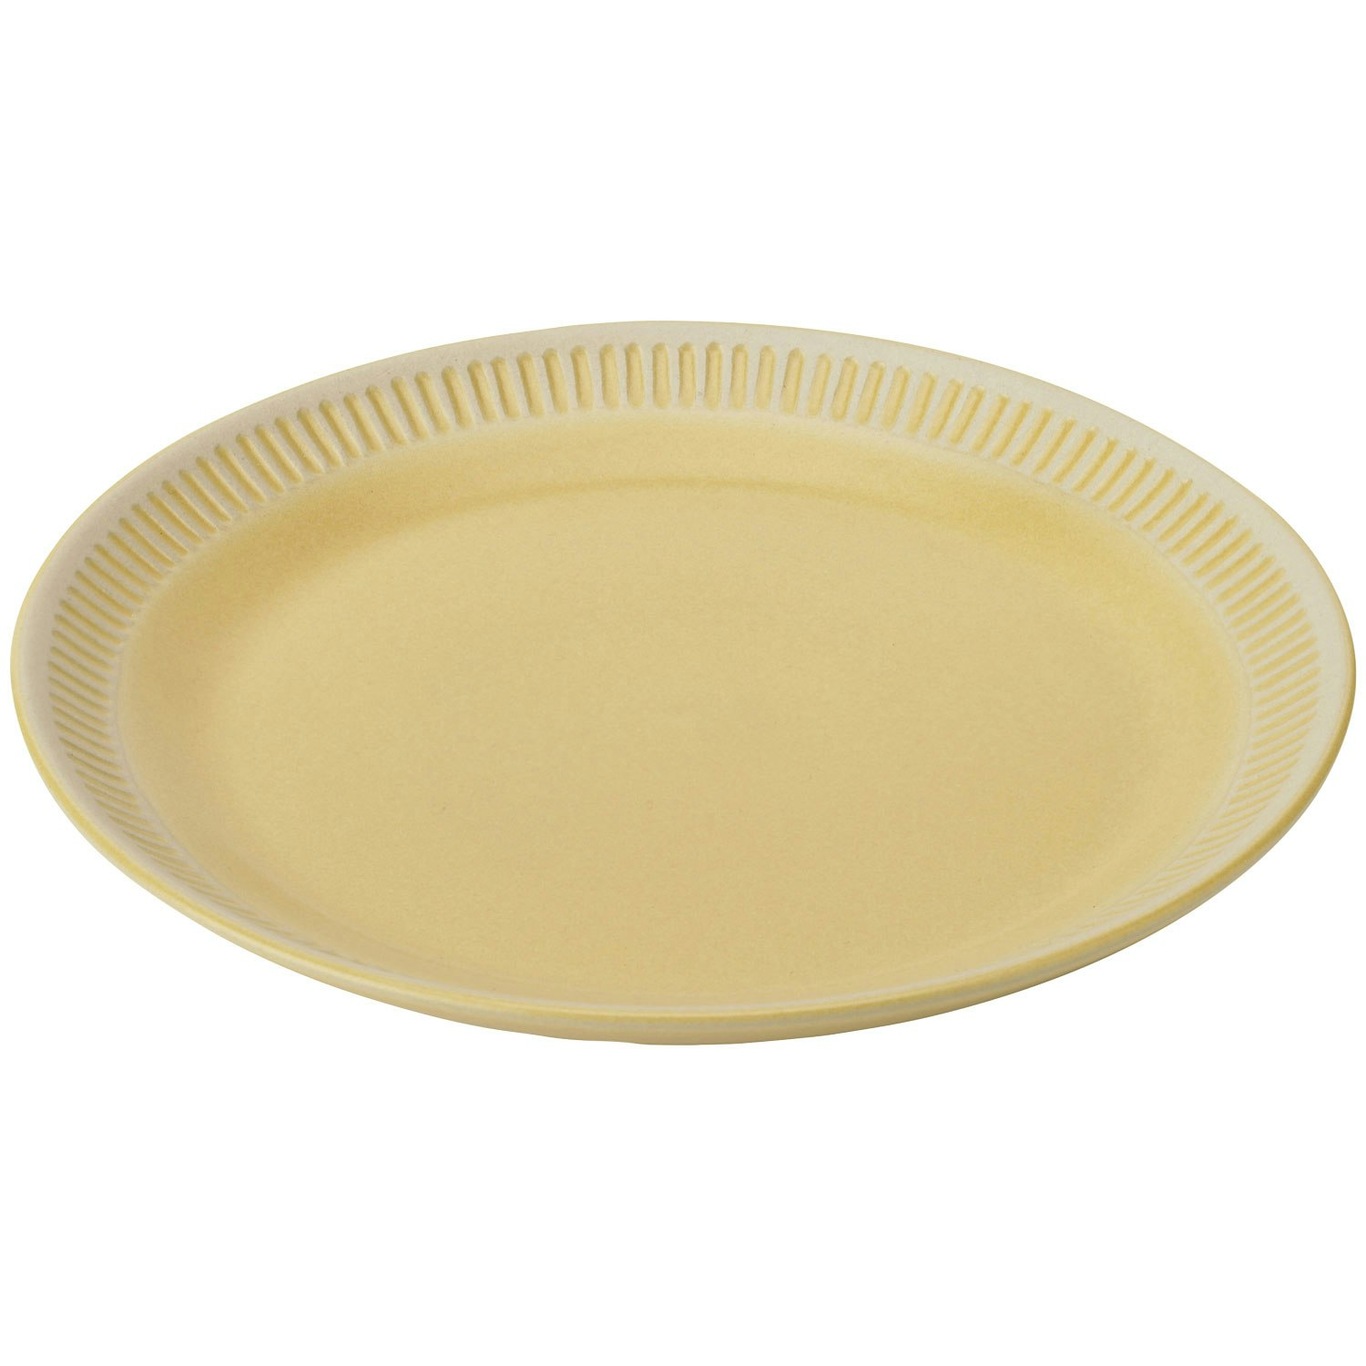 Colorit Plate 19 cm, Yellow